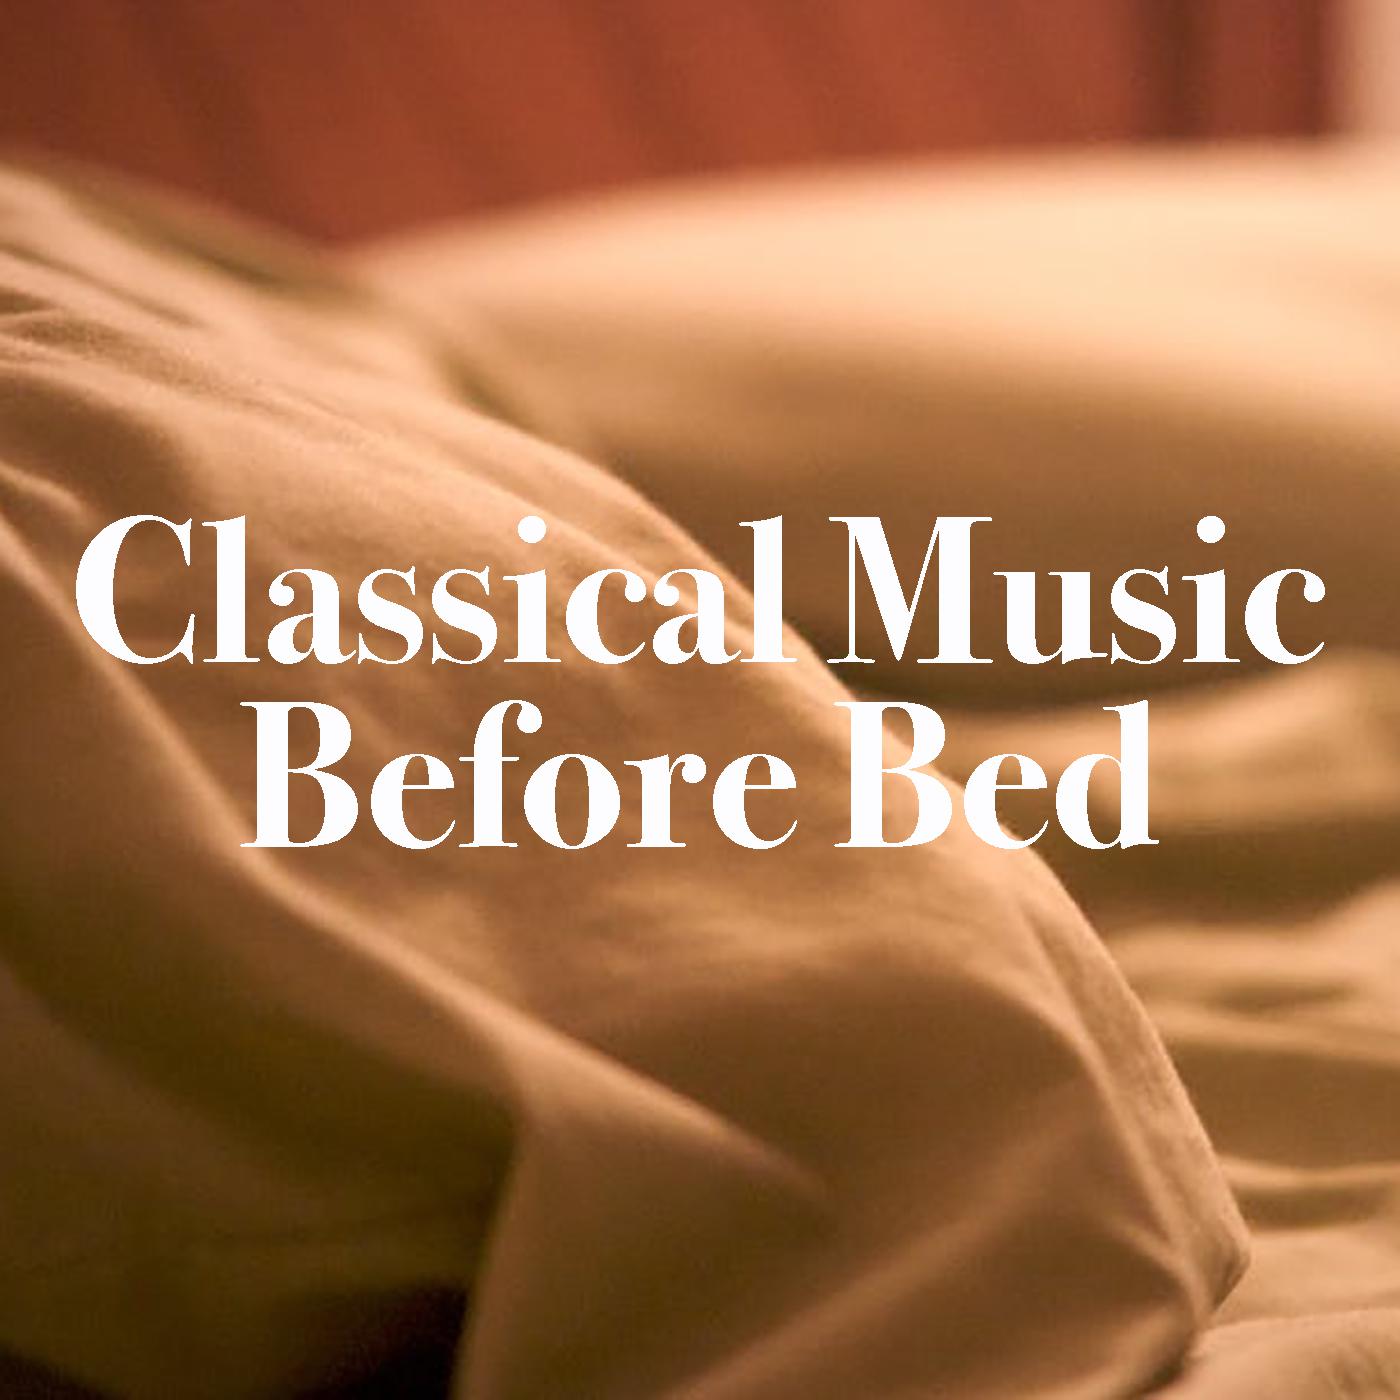 Classical Music Before Bed